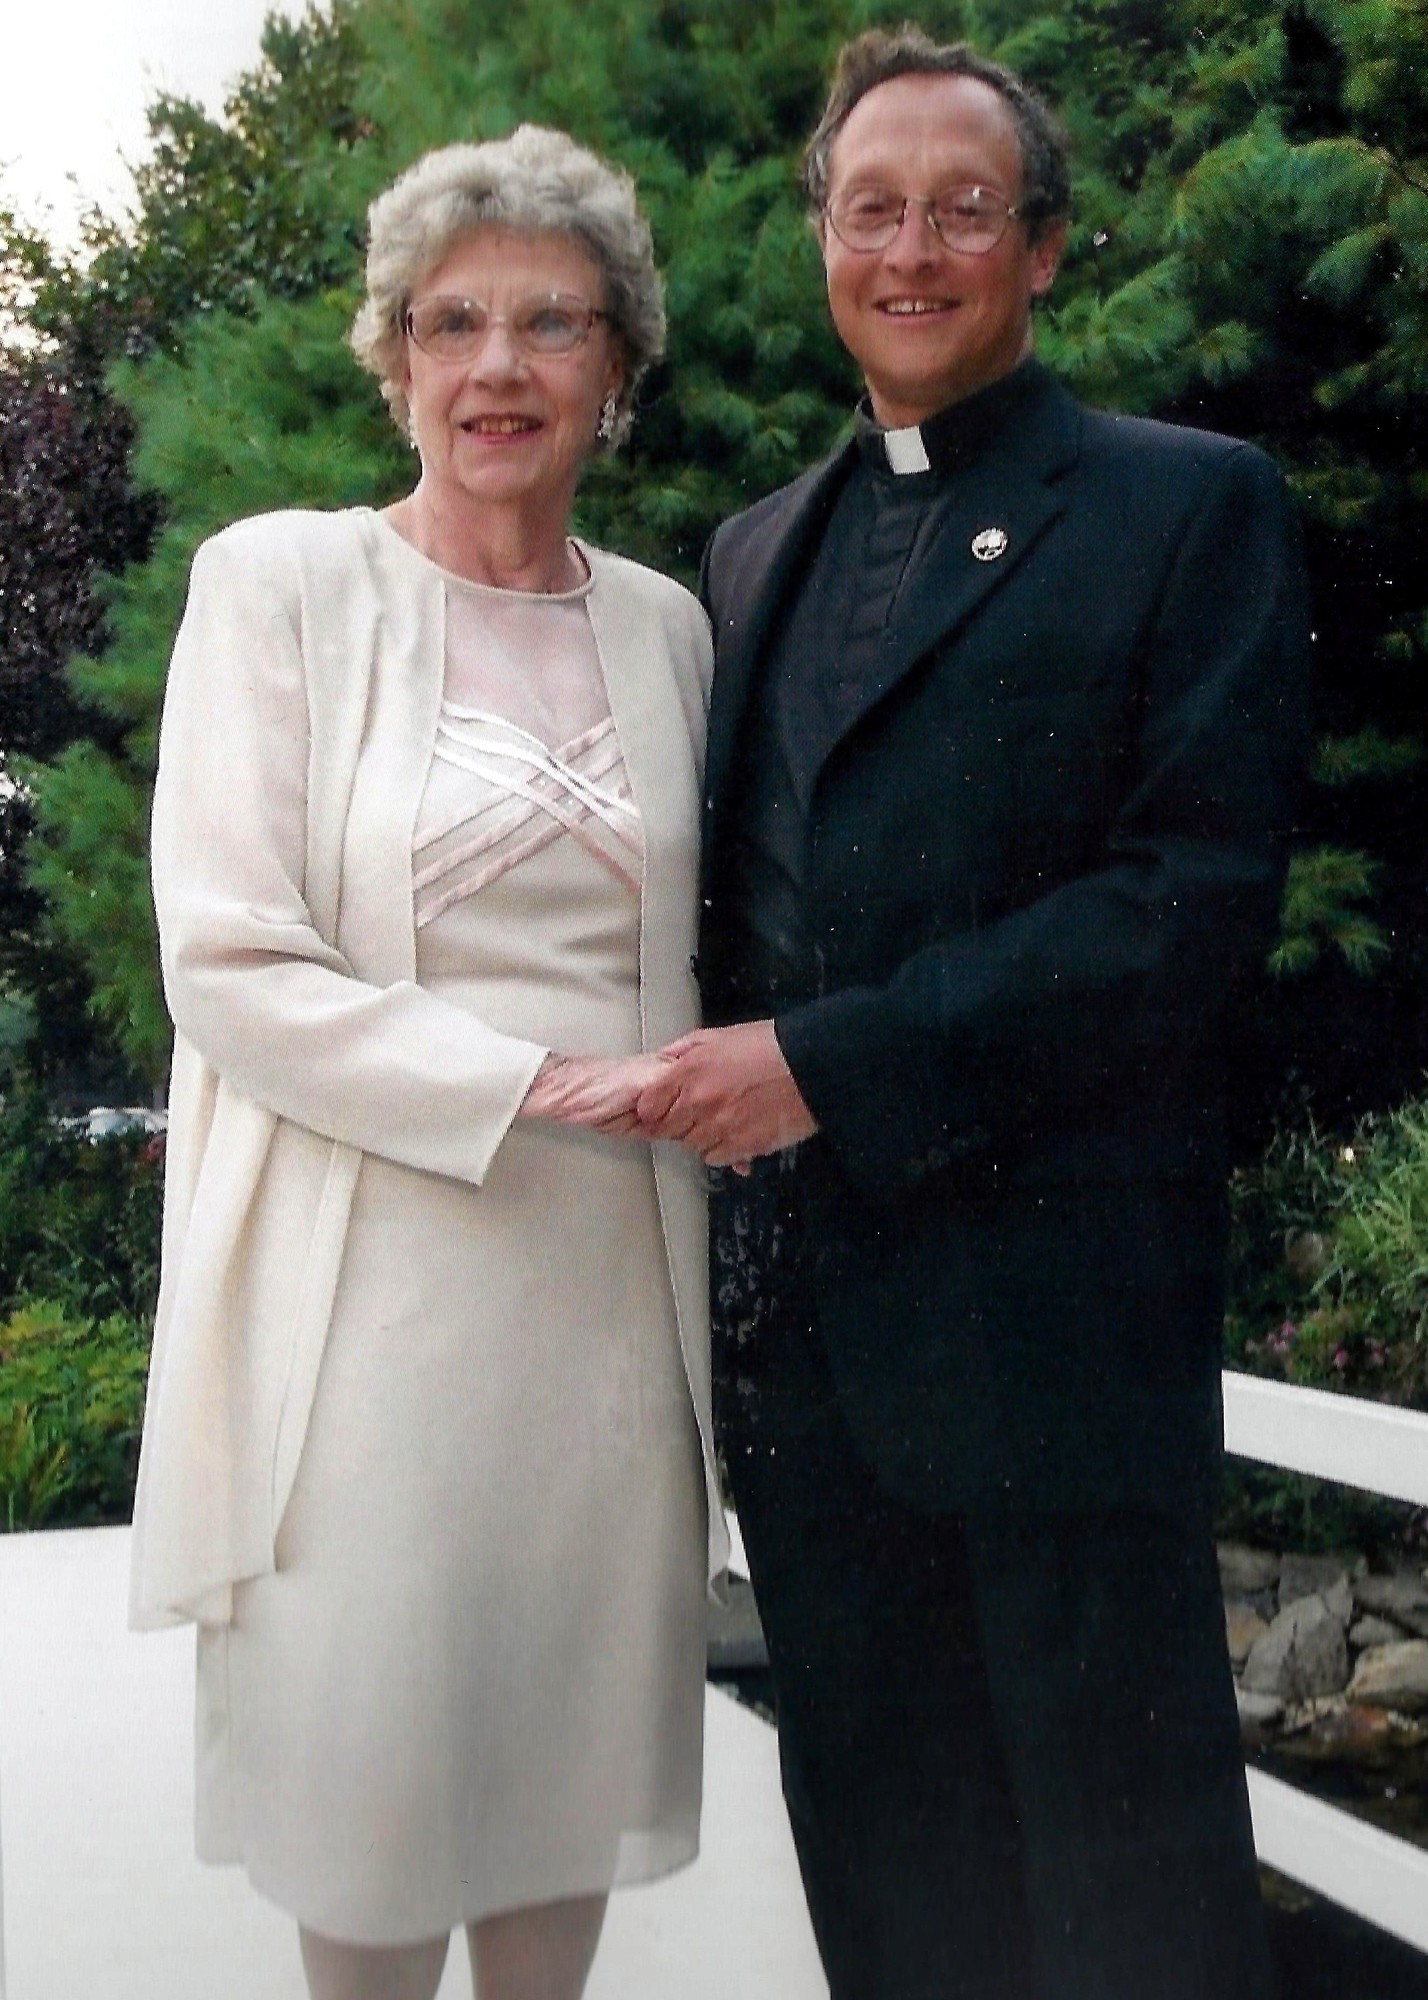 father frank with his mother in an undated family celebration.